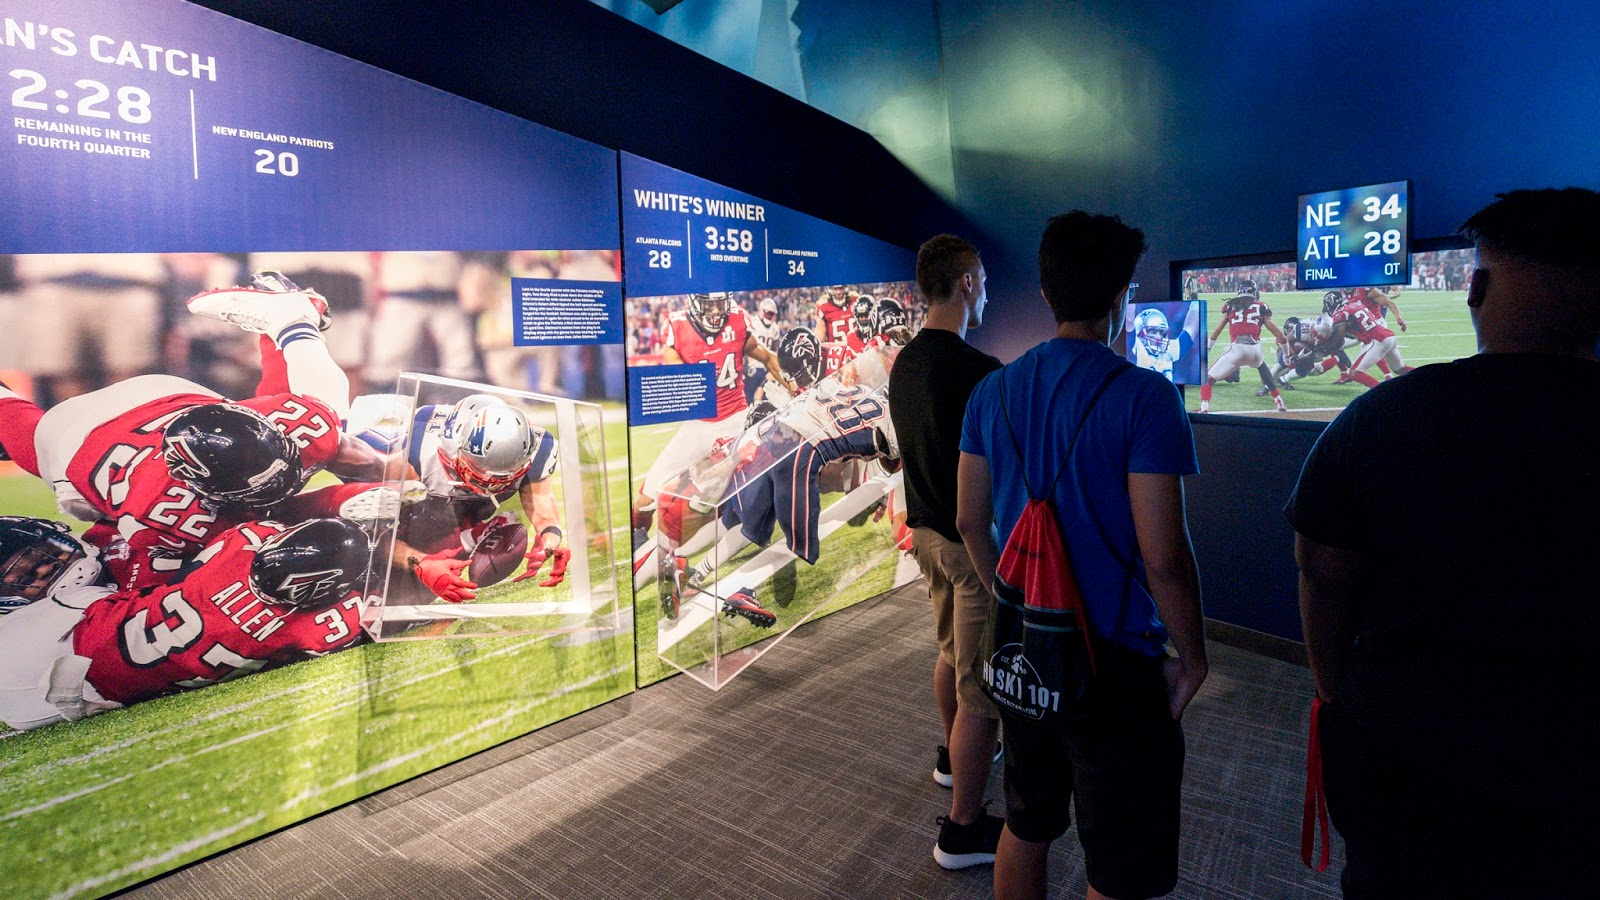 The Patriots Hall of Fame